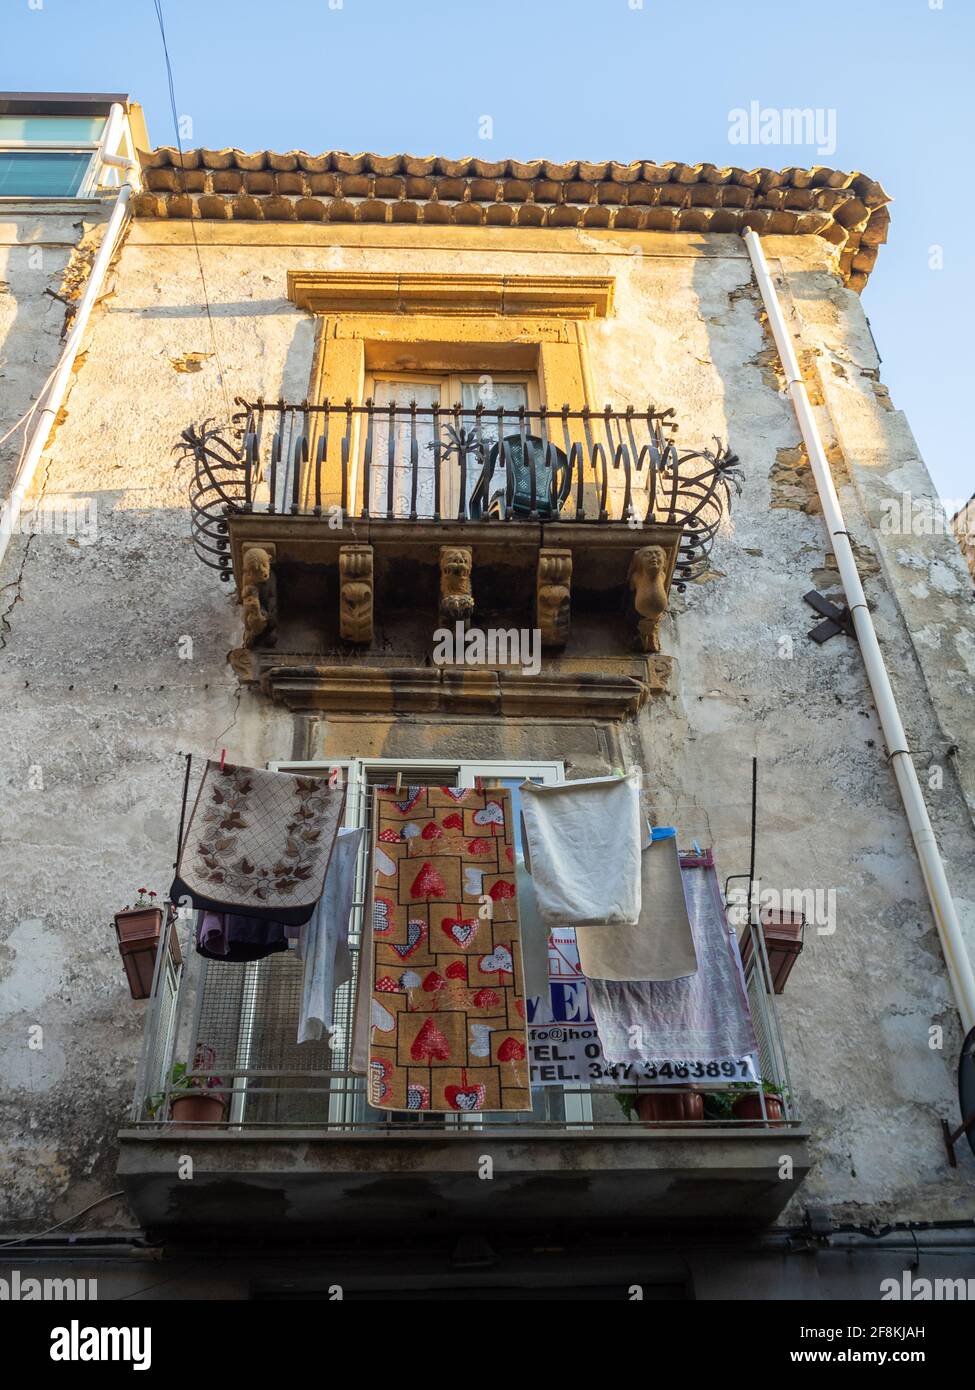 Drying clothes and baroque balconies Stock Photo